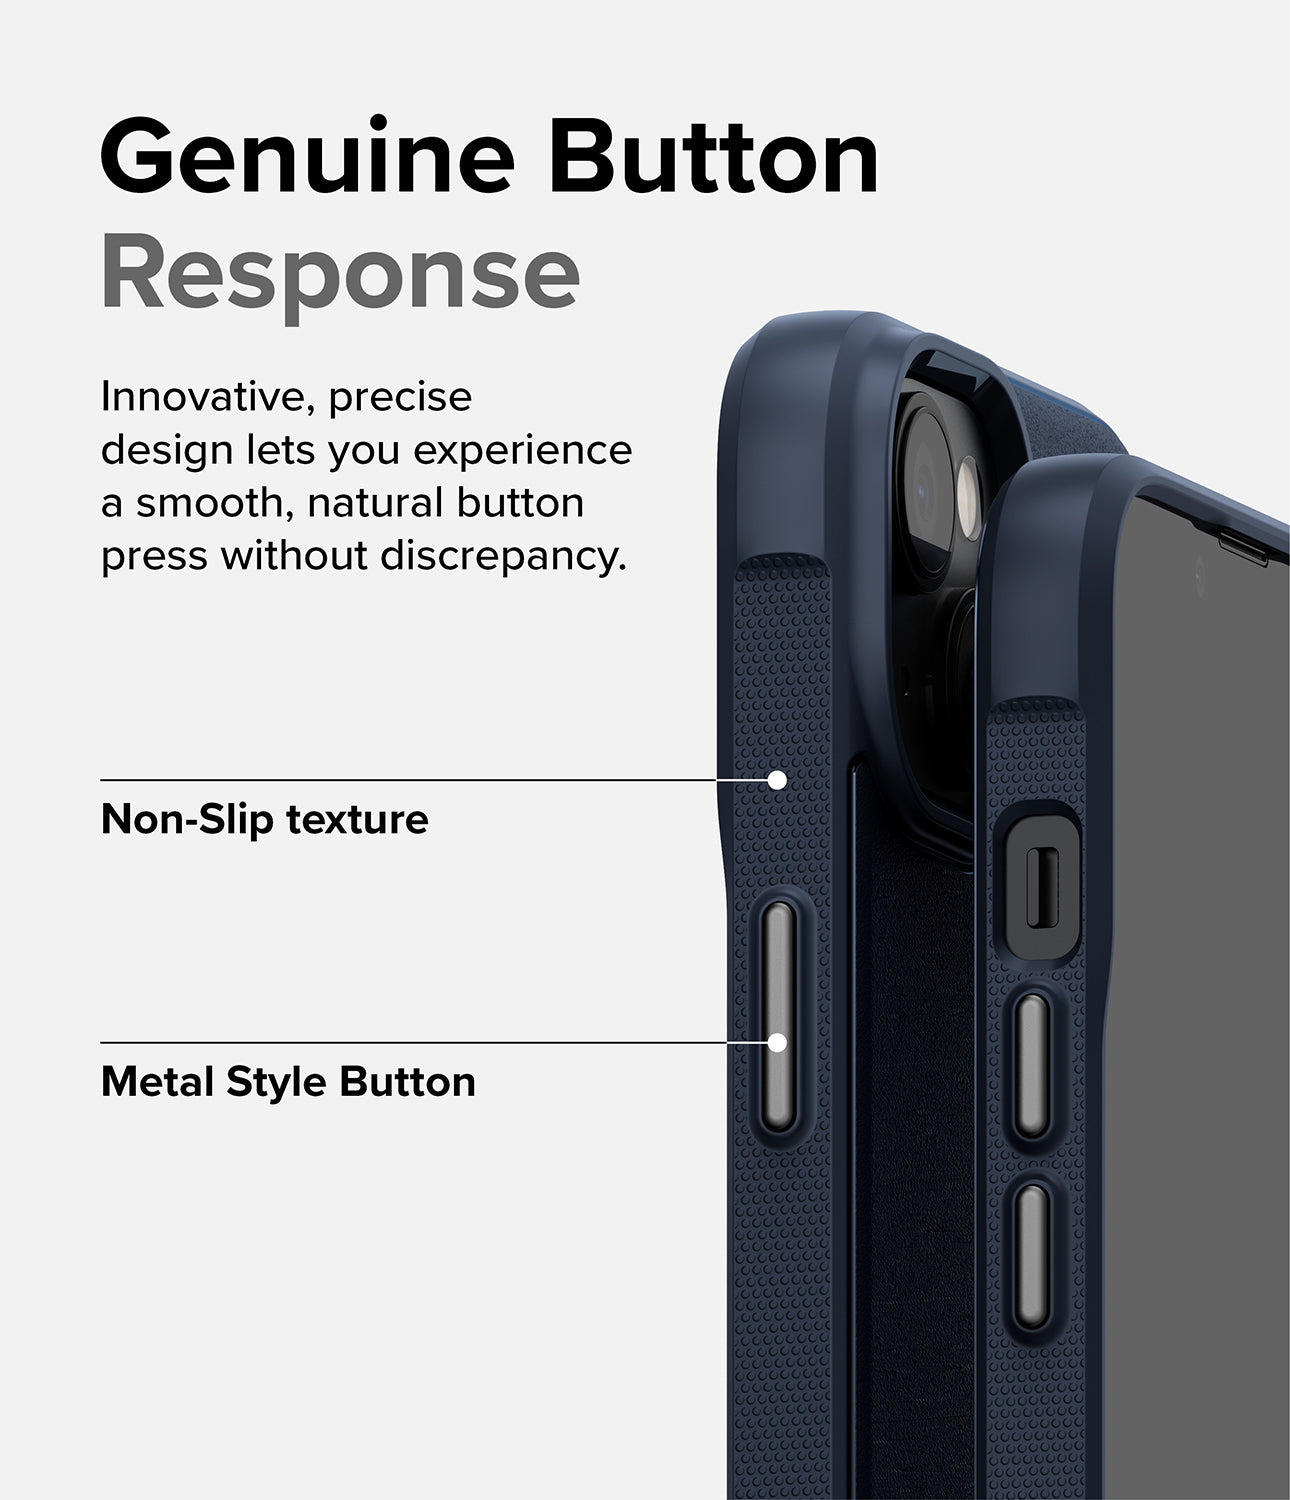 iPhone 14 Case | Onyx - Navy - Genuine Button Response. Innovative, precise design lets your experience a smooth, natural button press without discrepancy. Non-Slip texture. Metal Style Button.